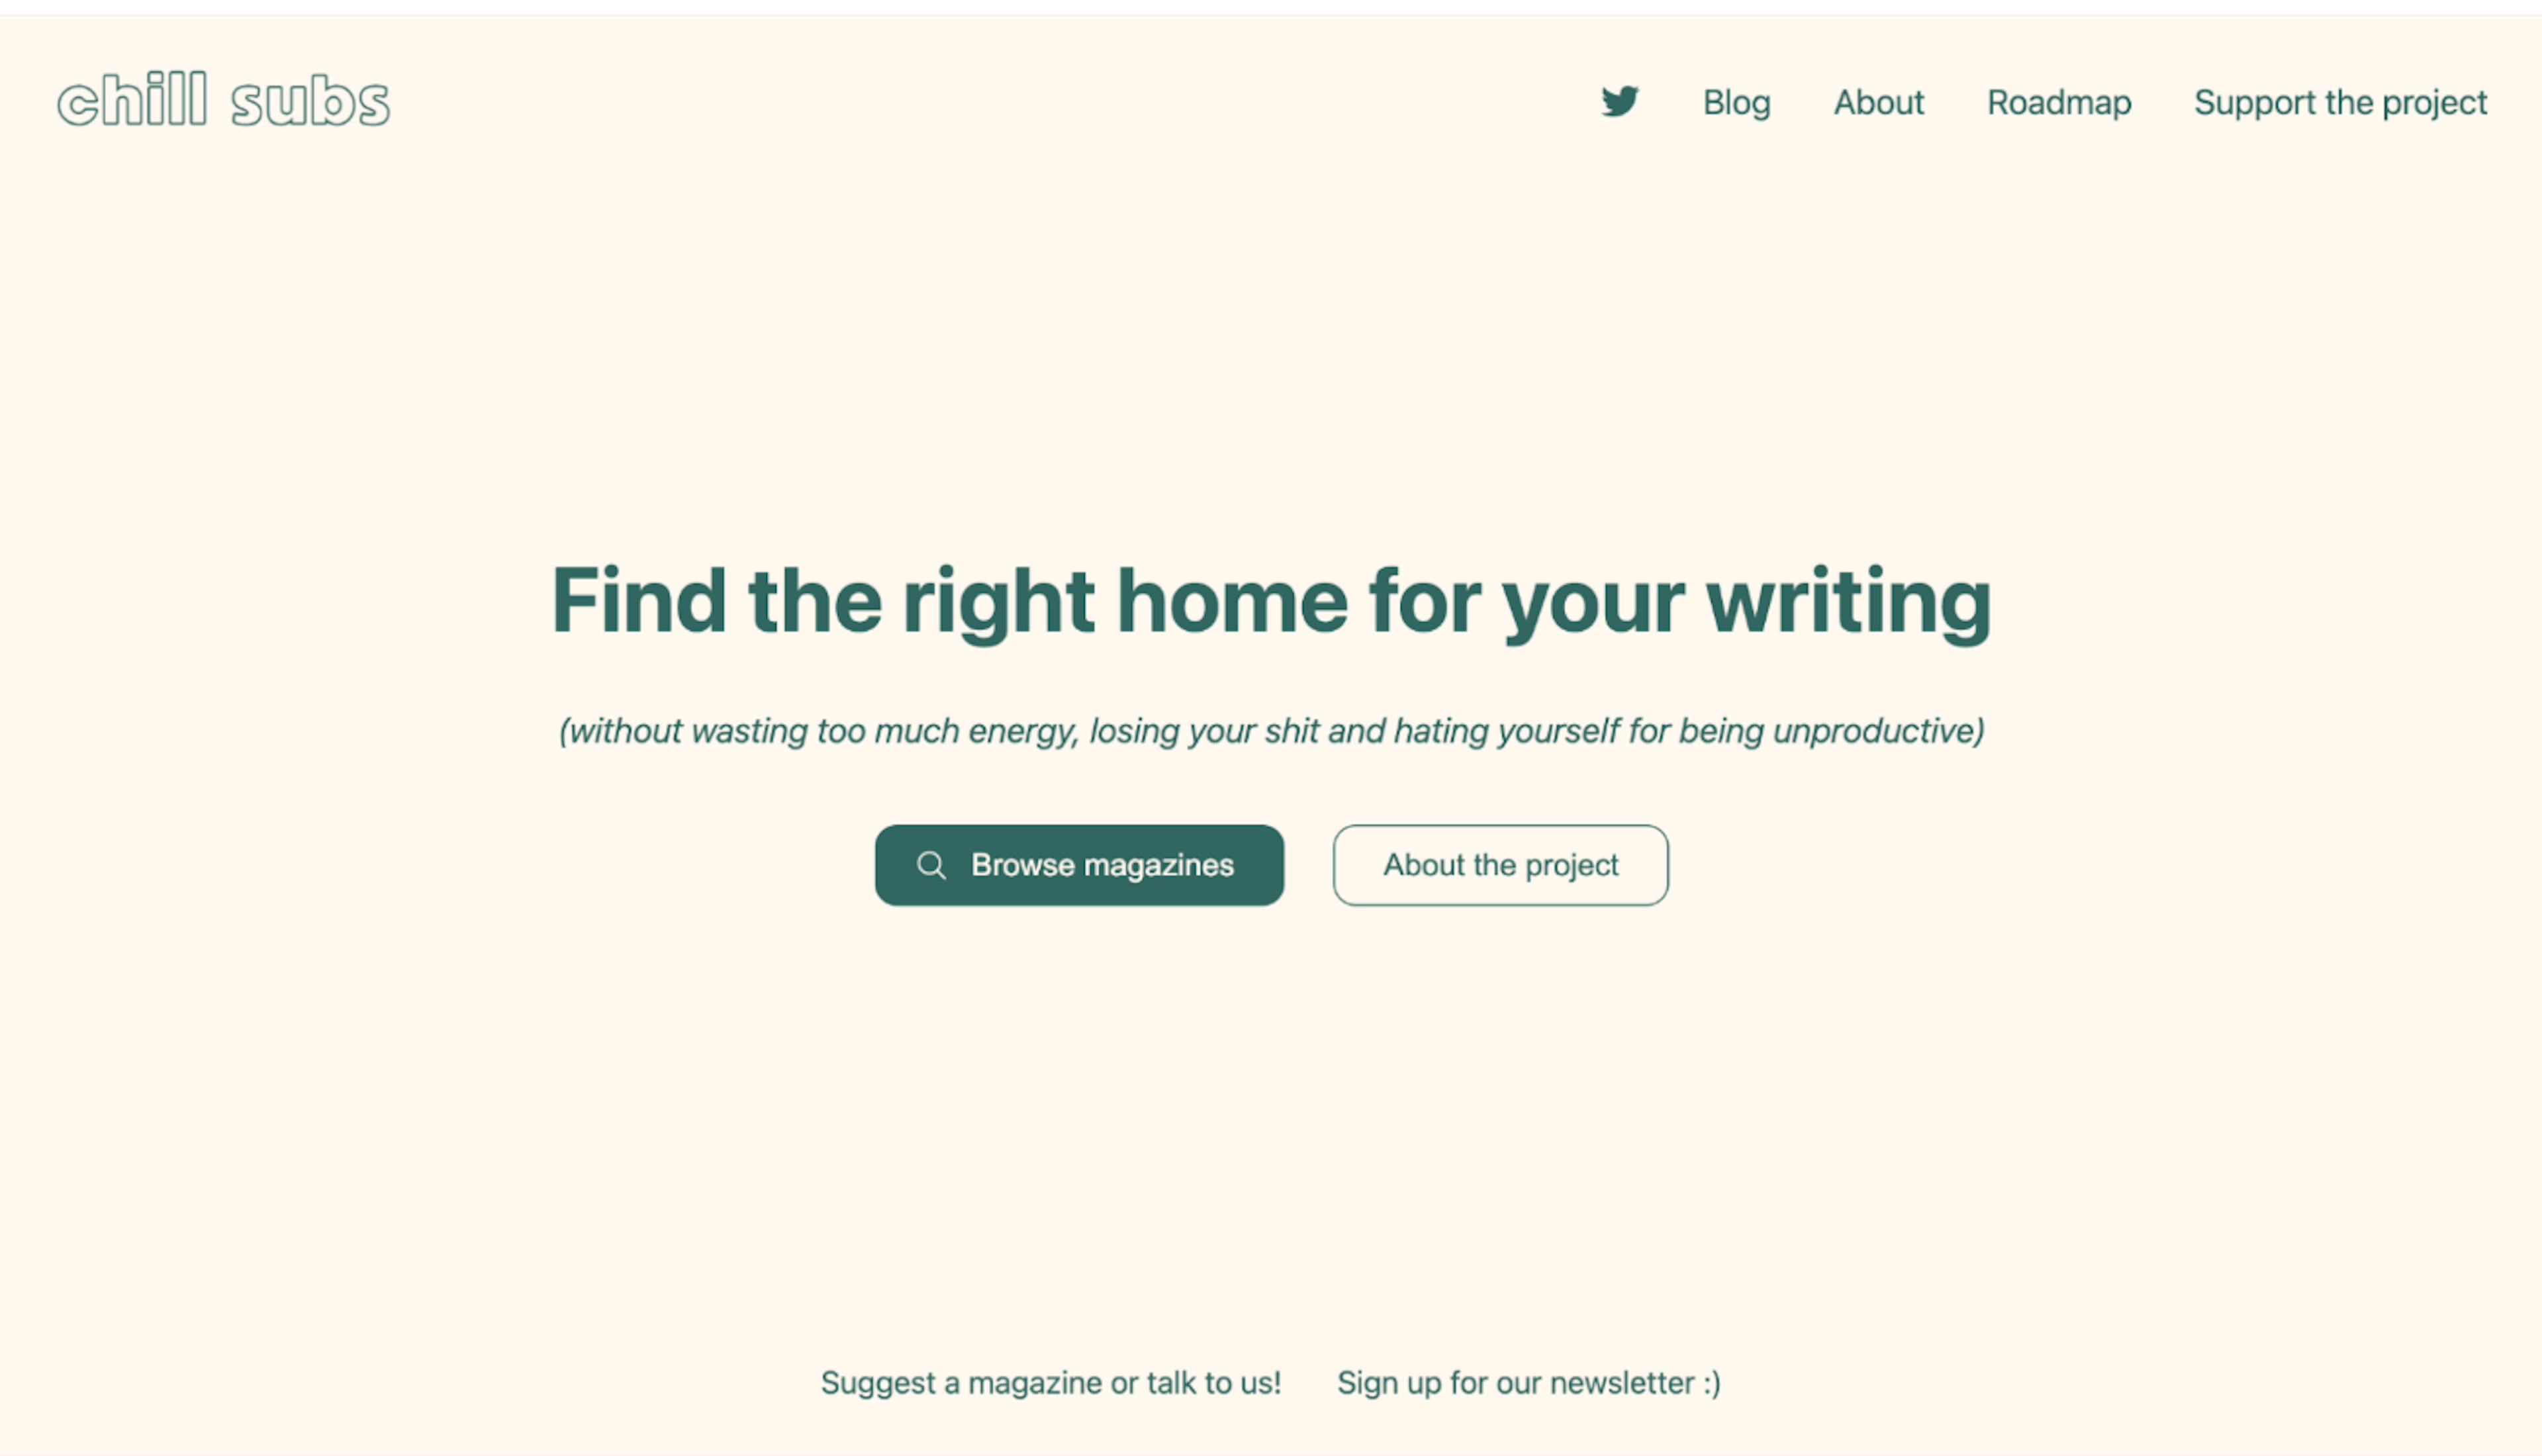 Homepage: “Find the right home for your writing (without wasting too much energy, losing your shit, and hating yourself for being unproductive)”